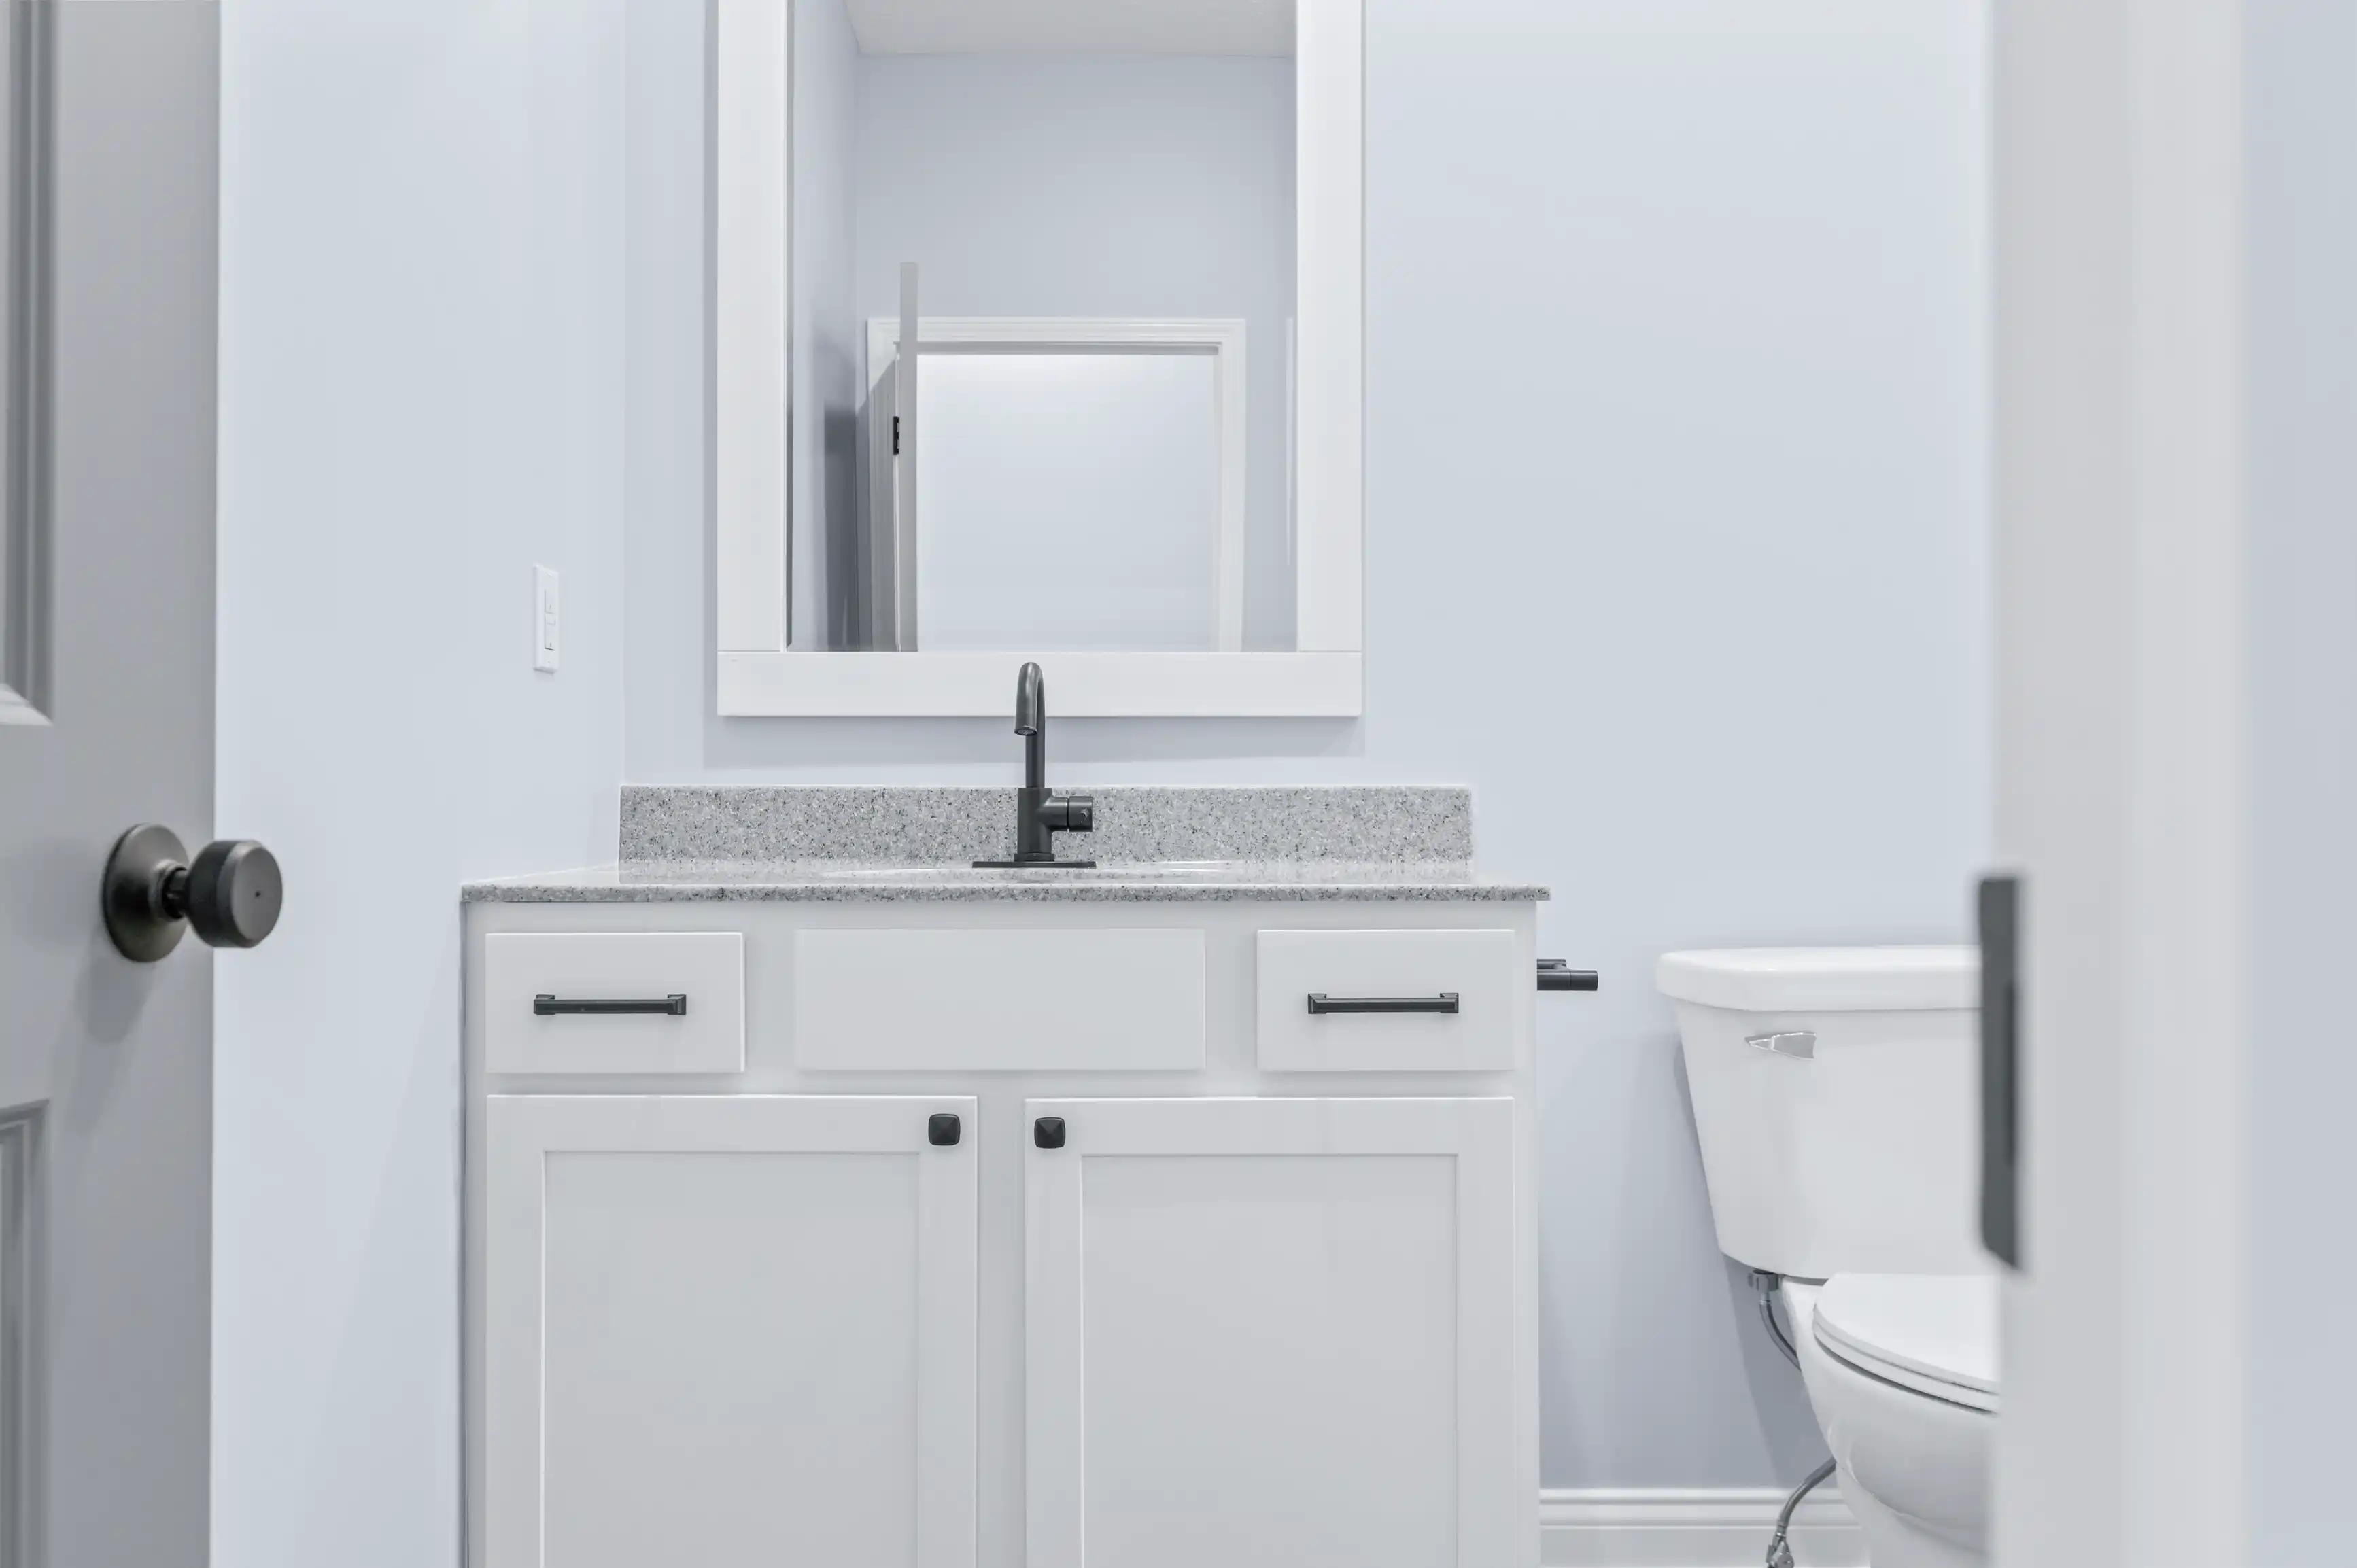 A modern, clean bathroom interior with a white vanity cabinet featuring a granite countertop and sink, a rectangular mirror above, and a toilet to the right, all against light blue walls.